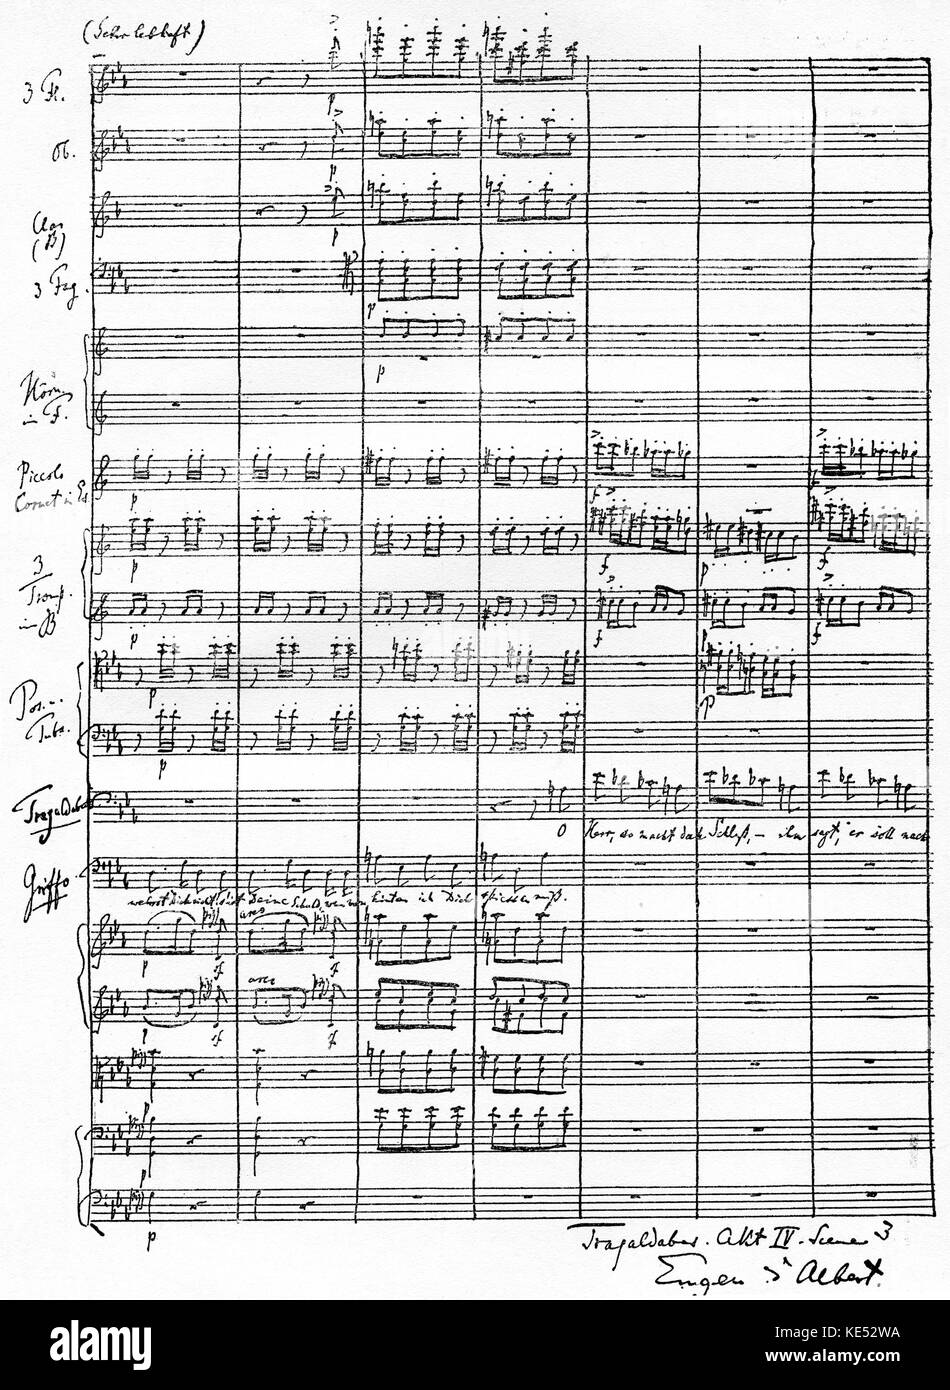 Eugen Francis Charles d' Albert  score Tragaldabas (1907)  Act IV, Scene 3. German   pianist and composer of Scottish birth . 10 April 1864 – 3 March 1932 Stock Photo